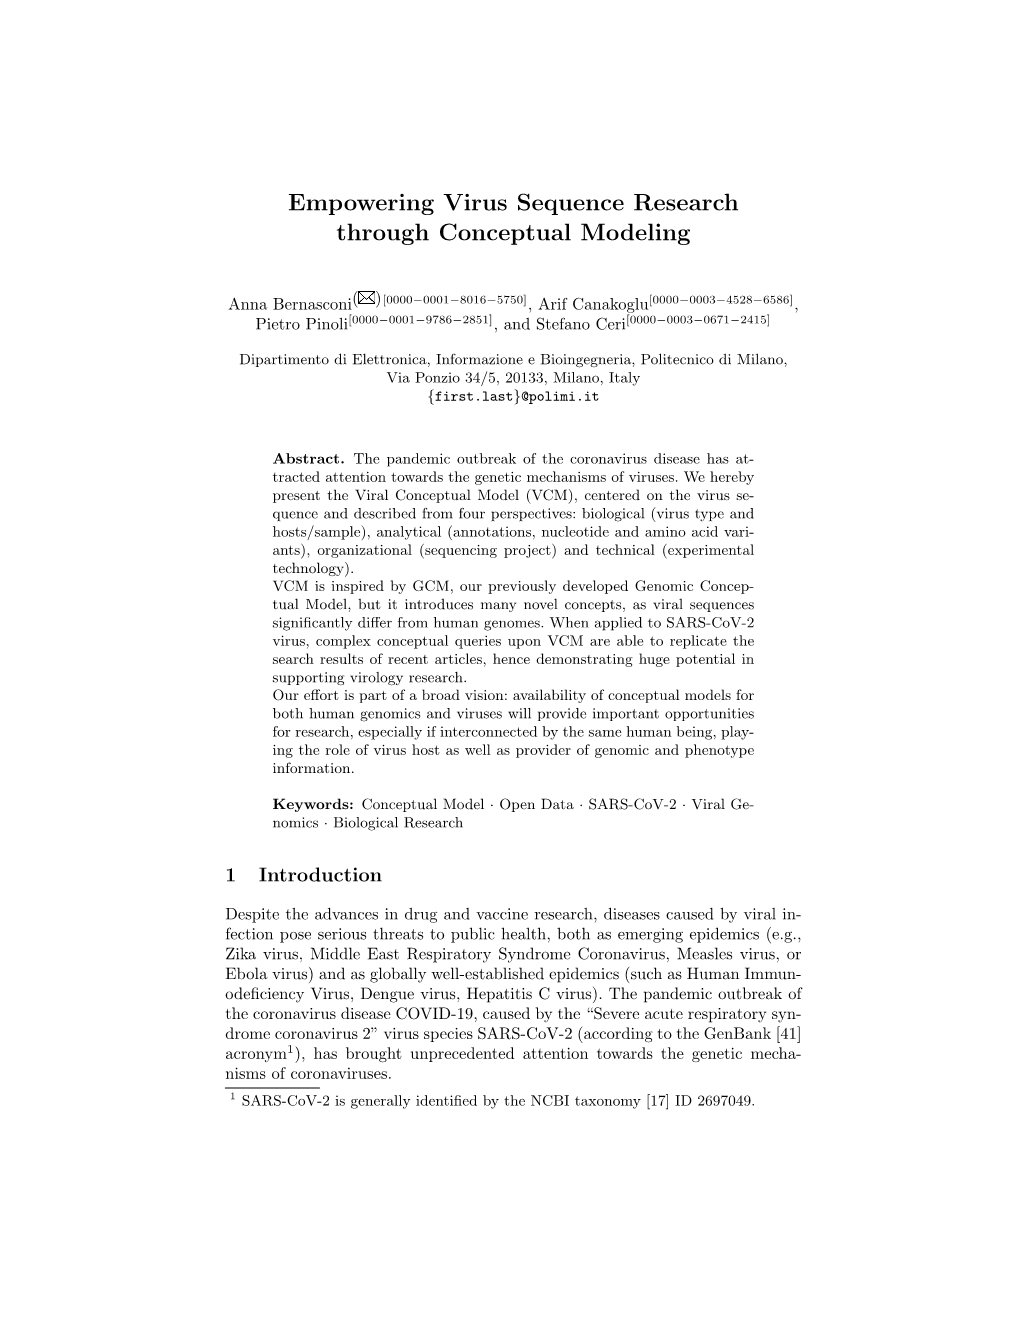 Empowering Virus Sequence Research Through Conceptual Modeling